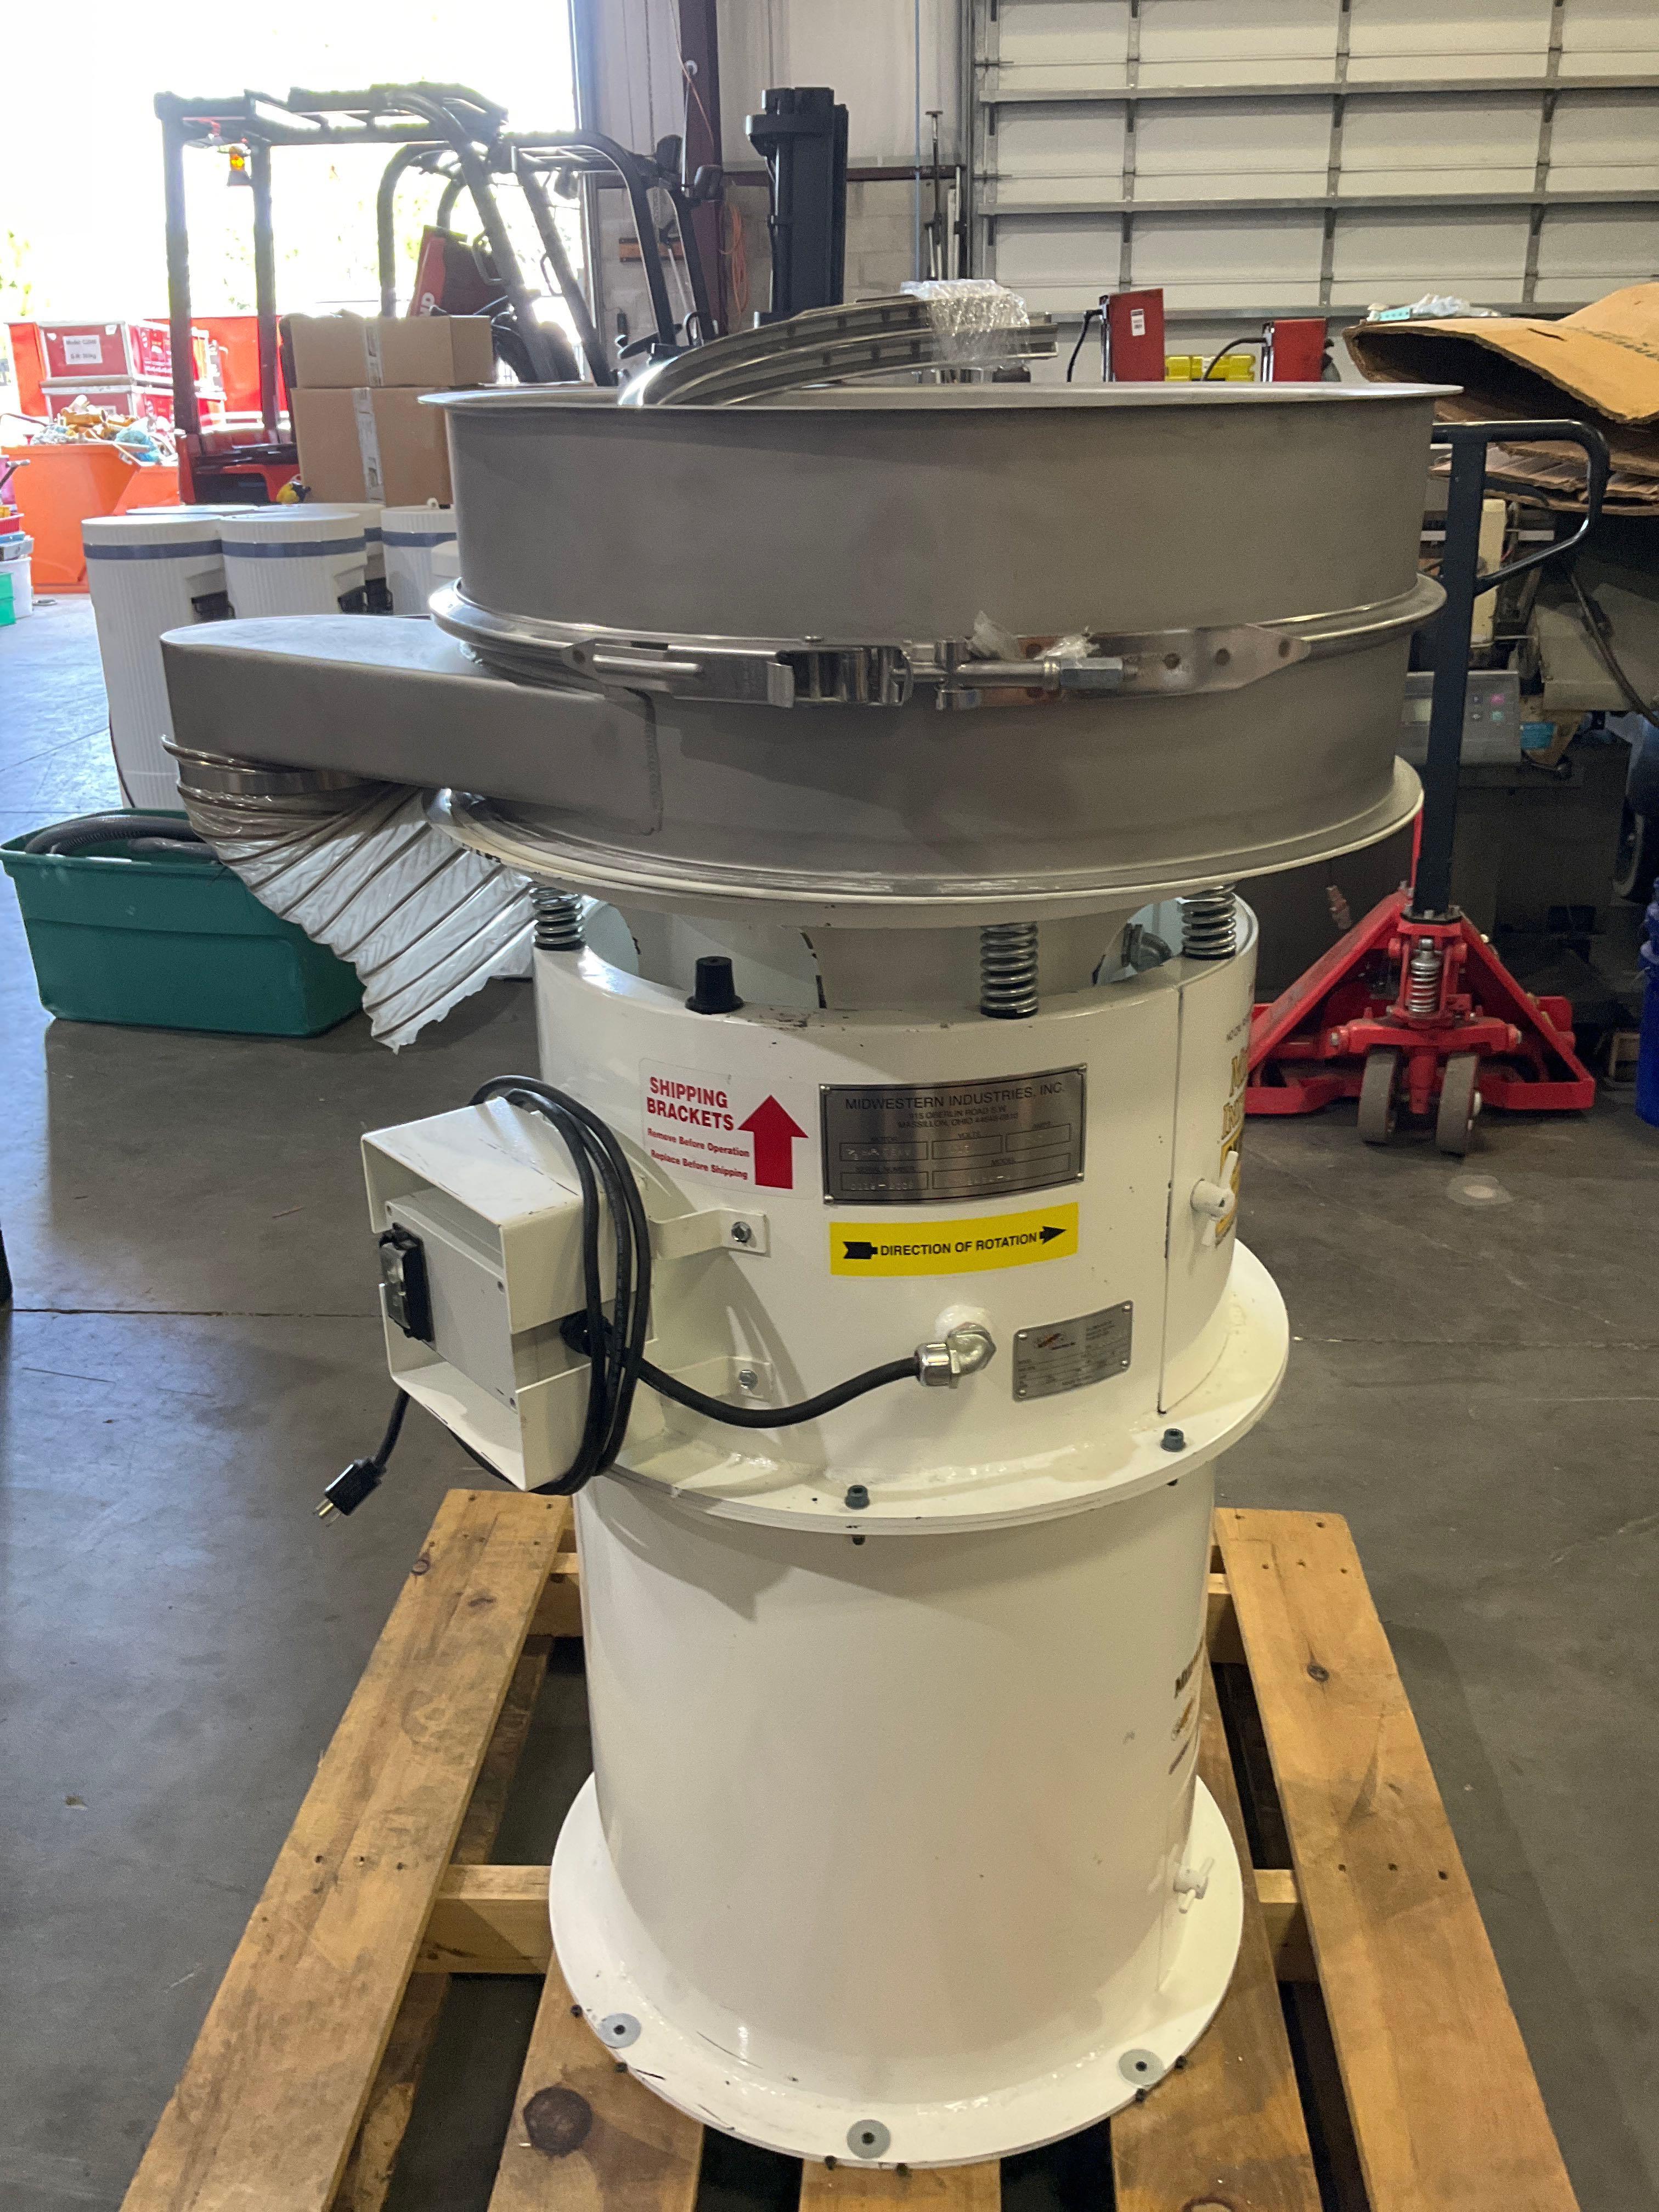 MIDWESTERN INDUSTRIES F1-24 SIFTER WITH MR24S4-4 MOTOR